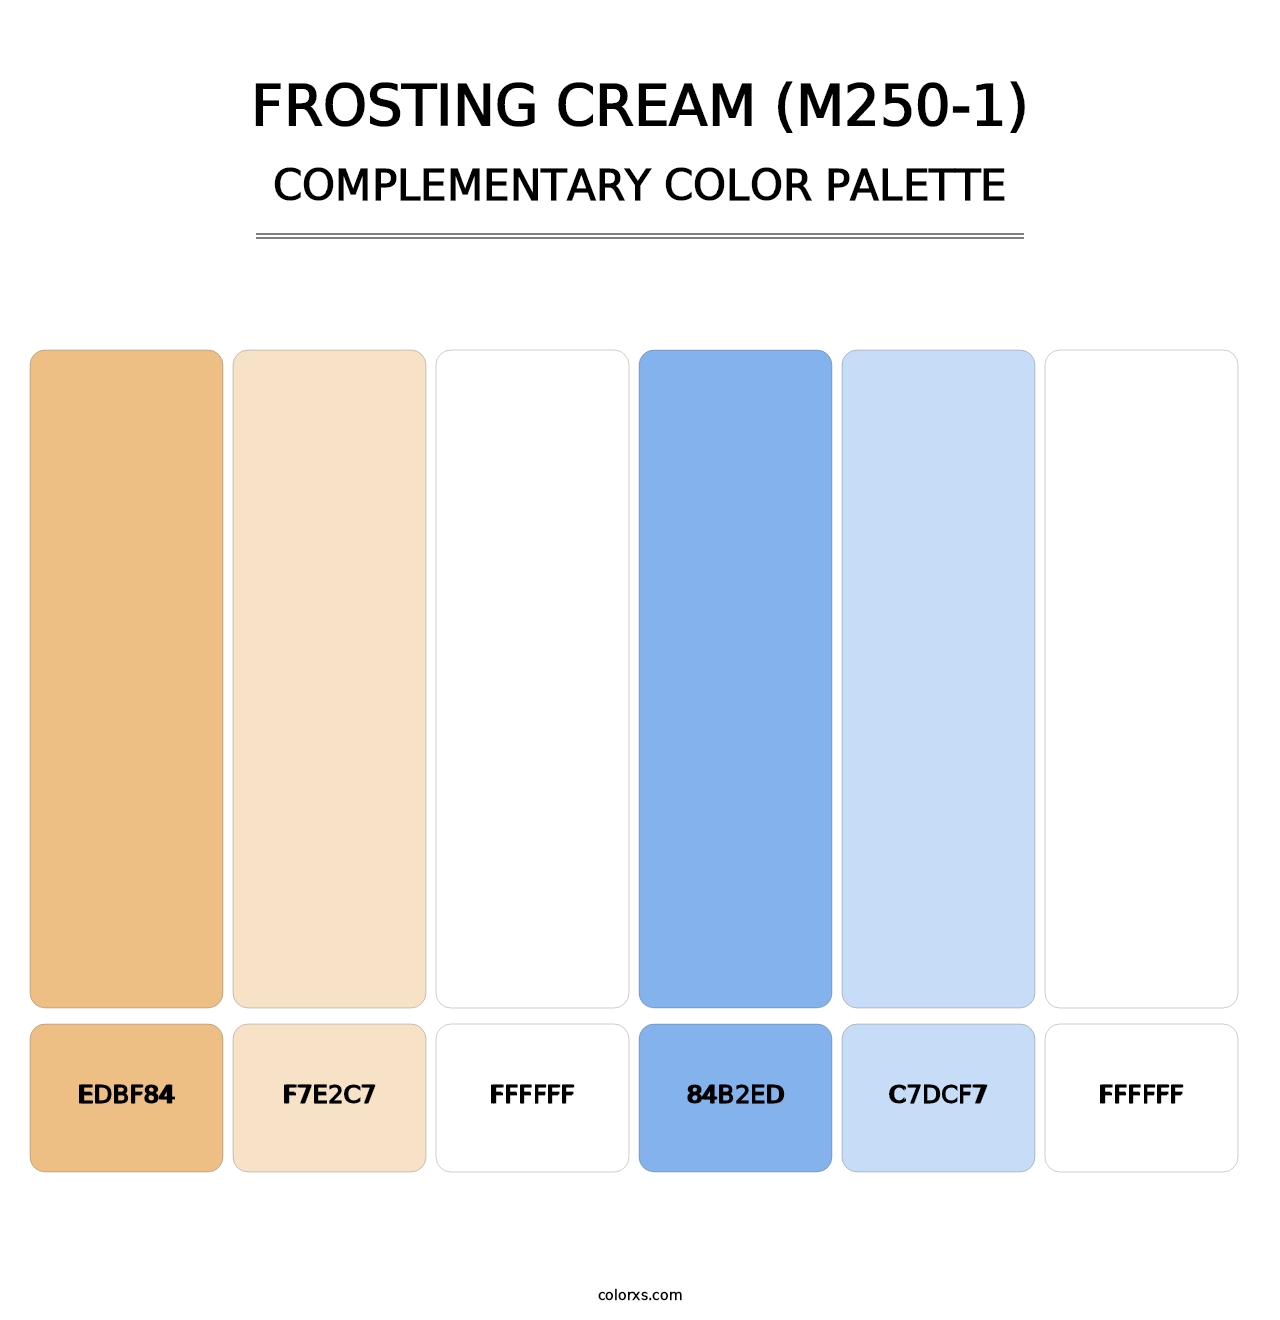 Frosting Cream (M250-1) - Complementary Color Palette